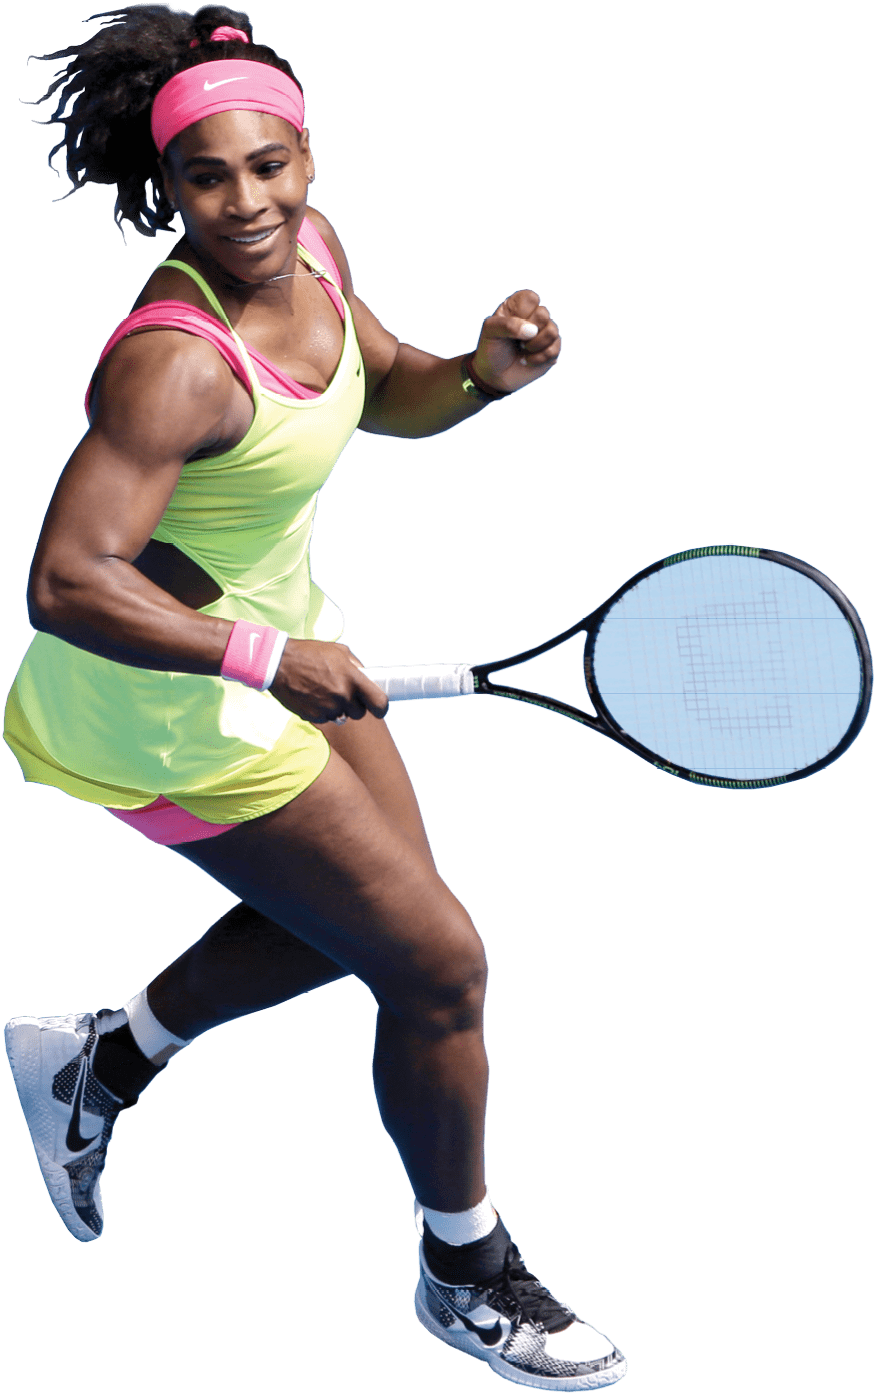 Clipart Of Serena Williams Clipground Png Tennis Player - Clipart Of Serena Williams Clipground Png Tennis Player (1919x1525)